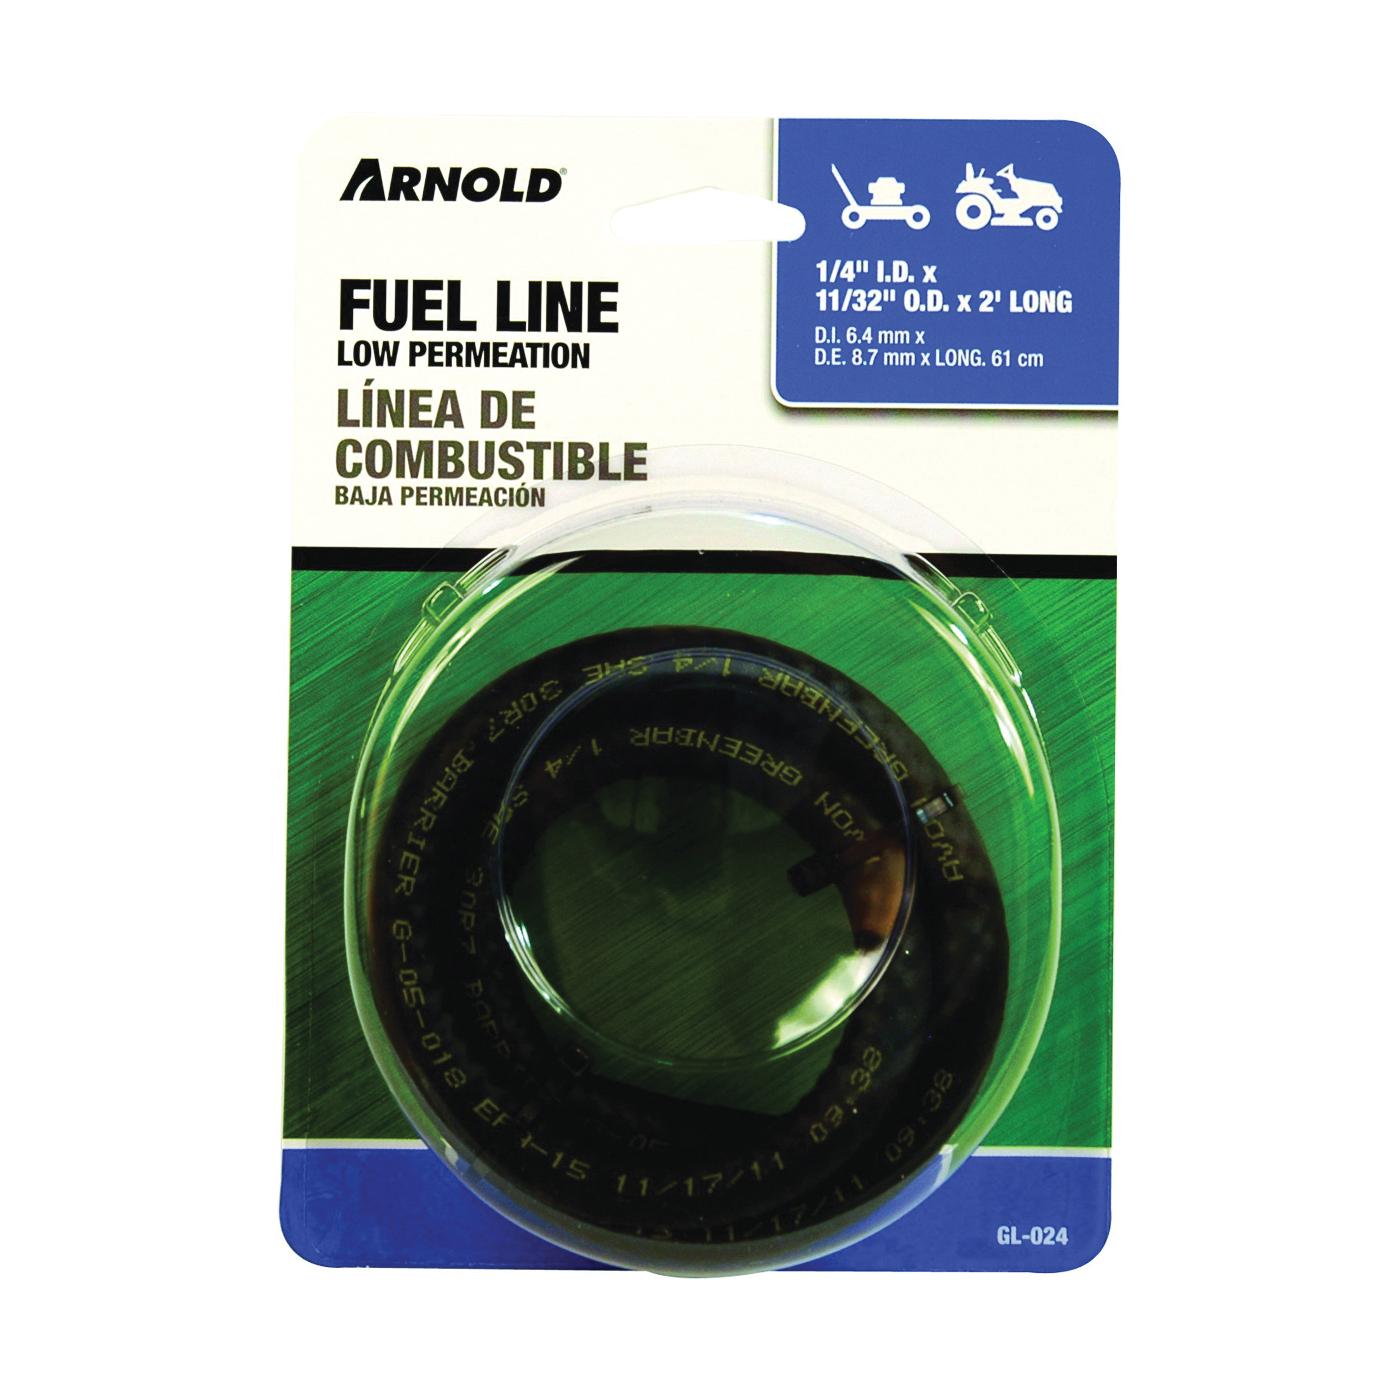 GL-024 Fuel Line, Low Permeation, Black, For: Walk Behind Mowers and Lawn Tractors